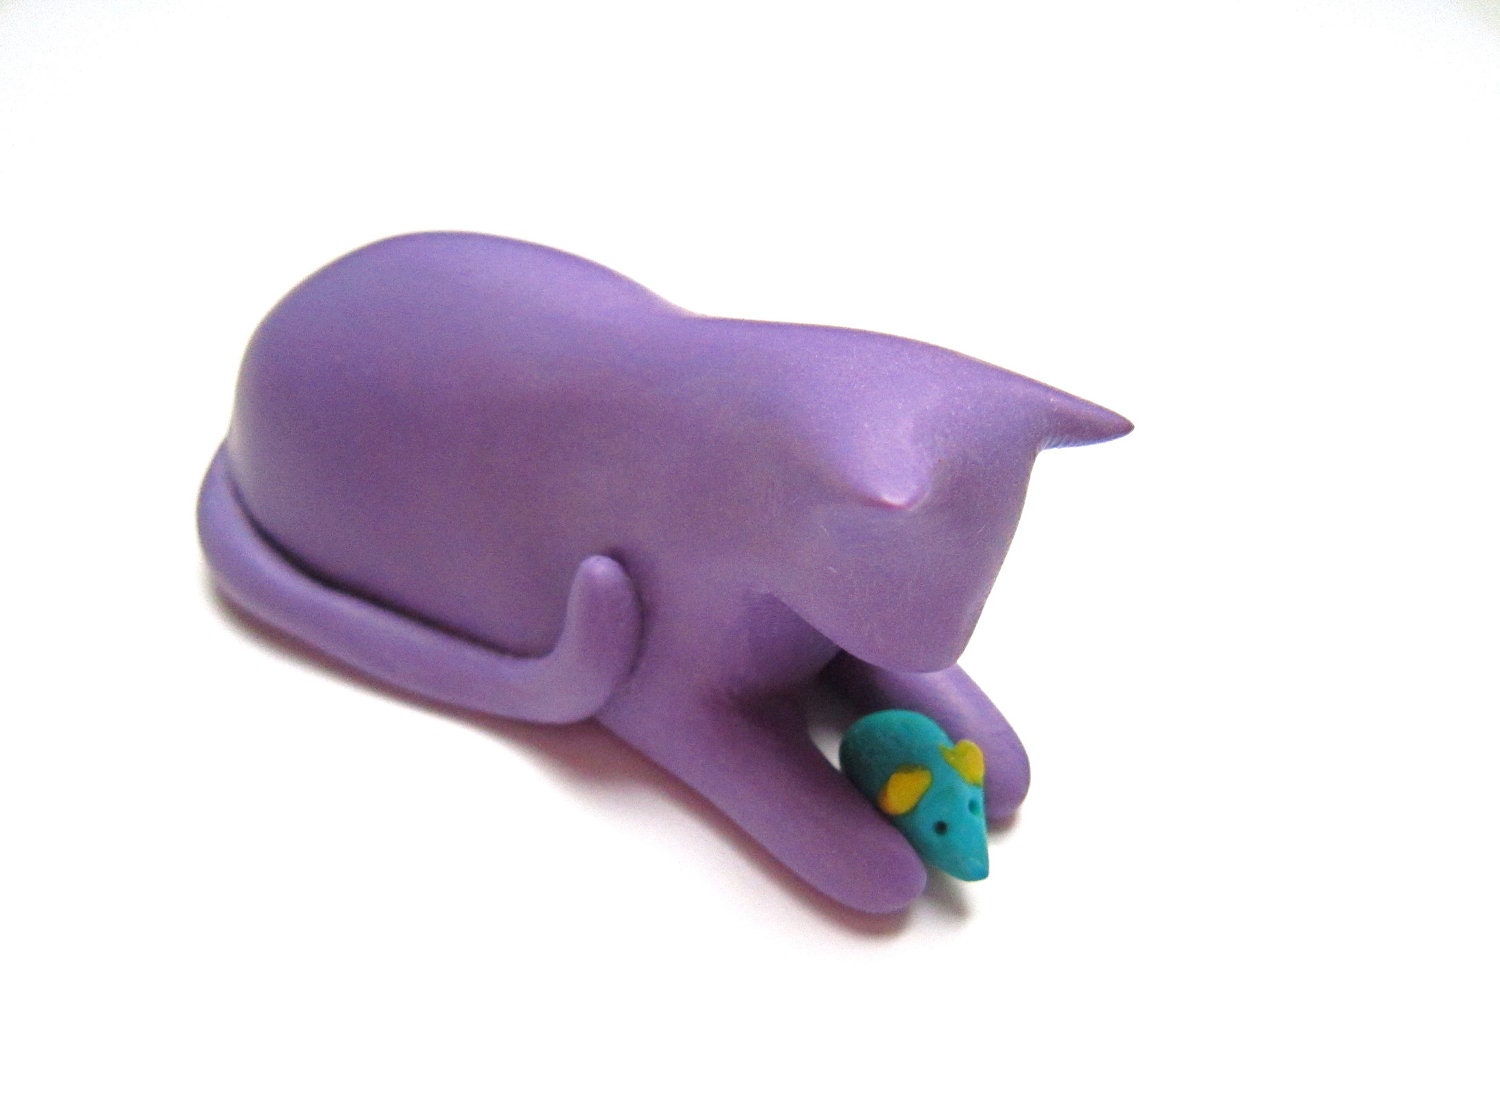 Little cat with toy mouse polymer clay sculpture lavender purple decoration hand made OOAK